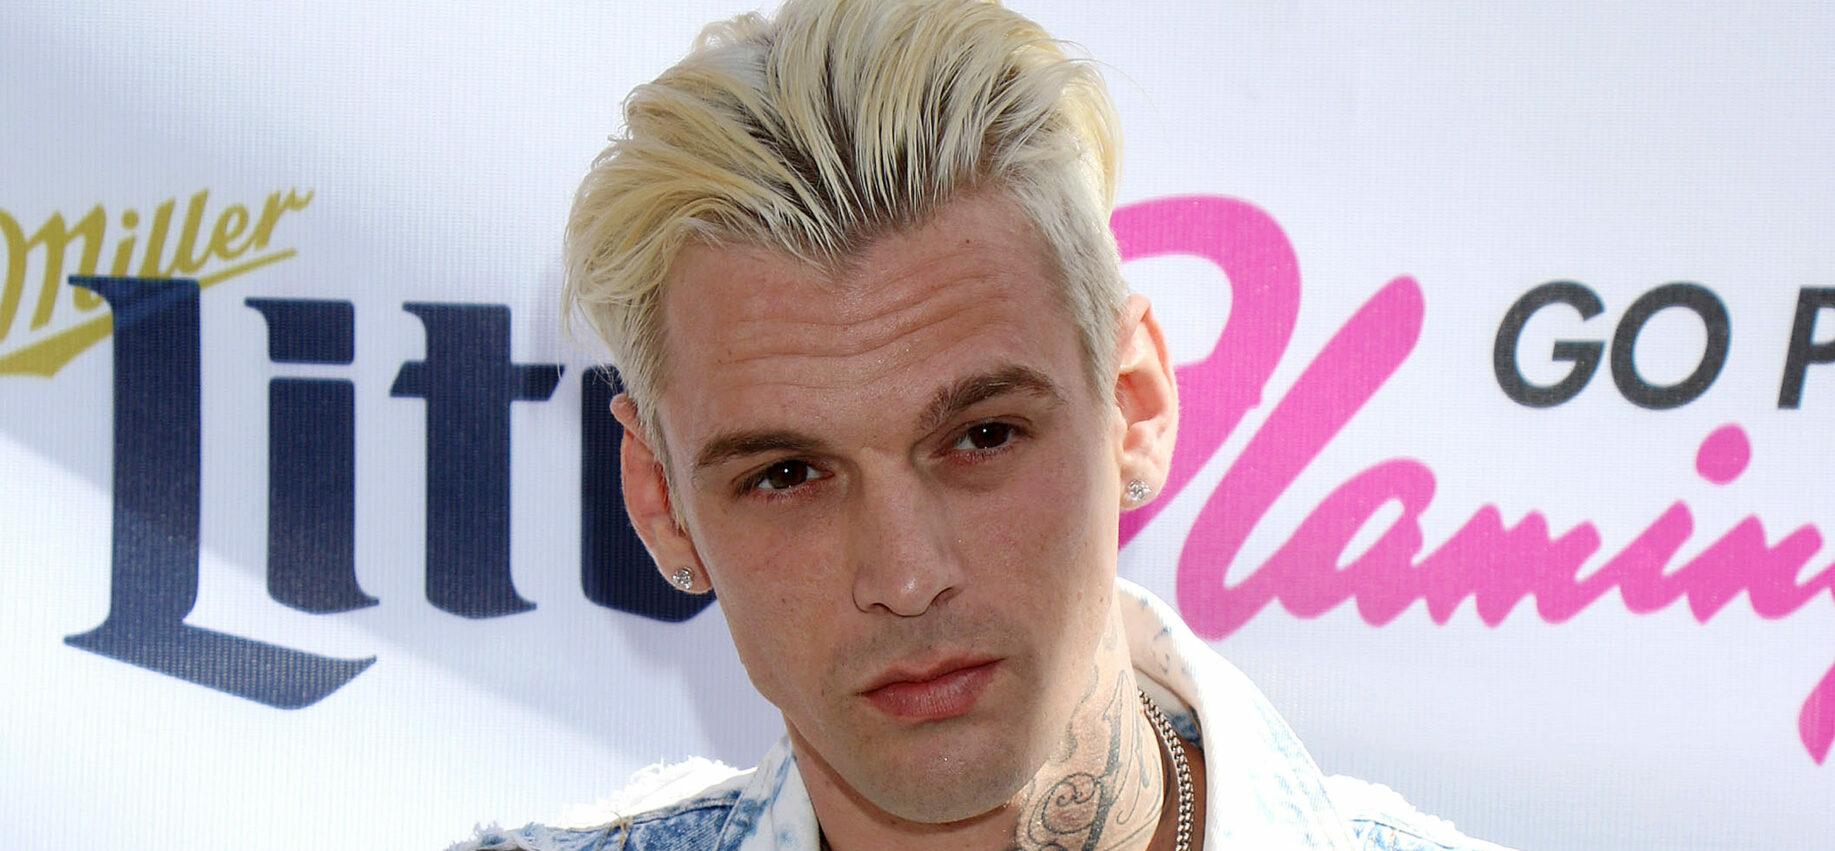 Aaron Carter Is Revamping His Shaky Music Career